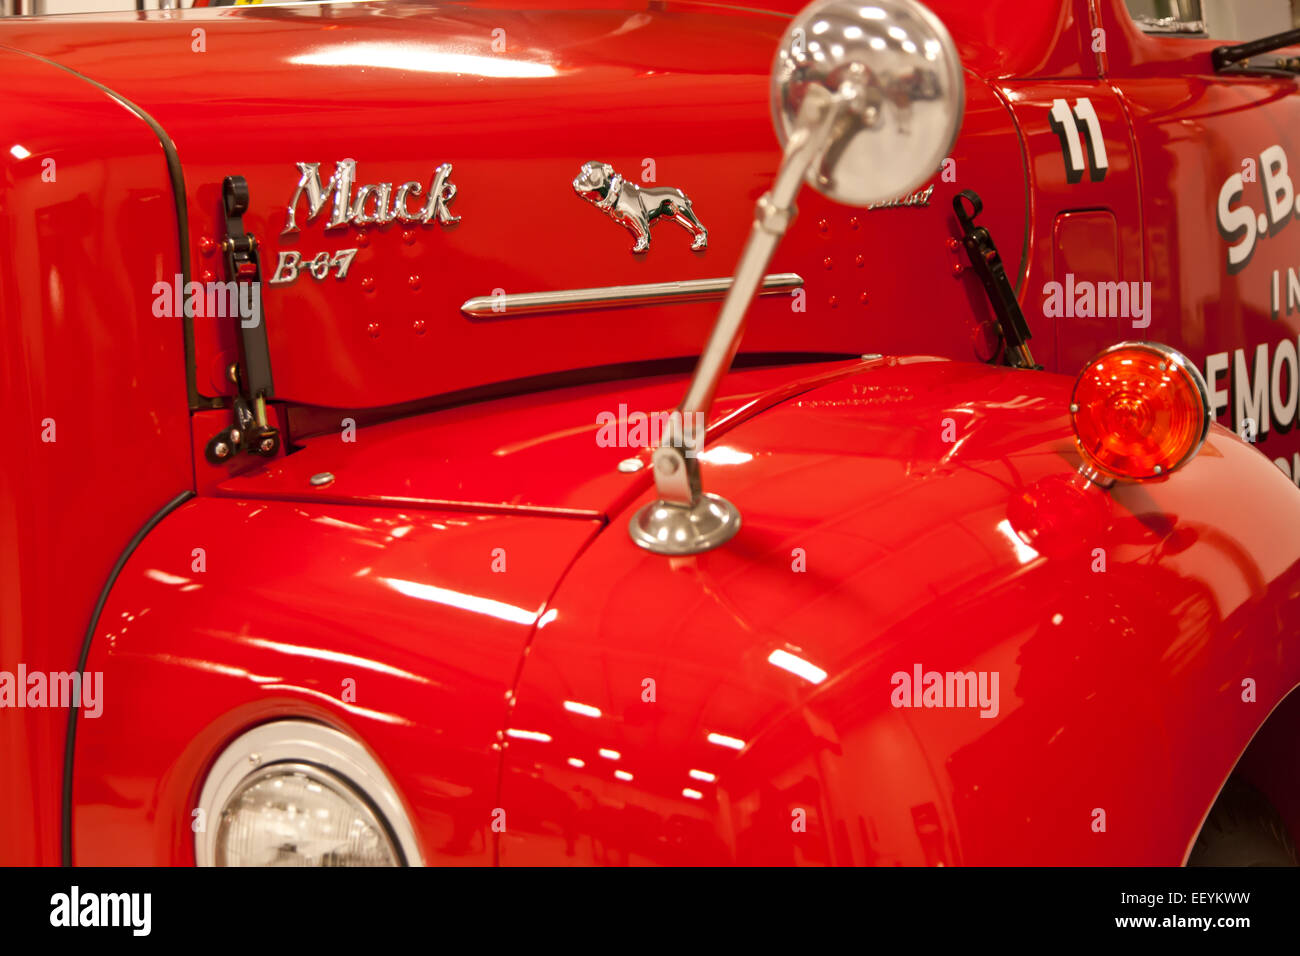 Closeup of a vintage red Mack truck Stock Photo